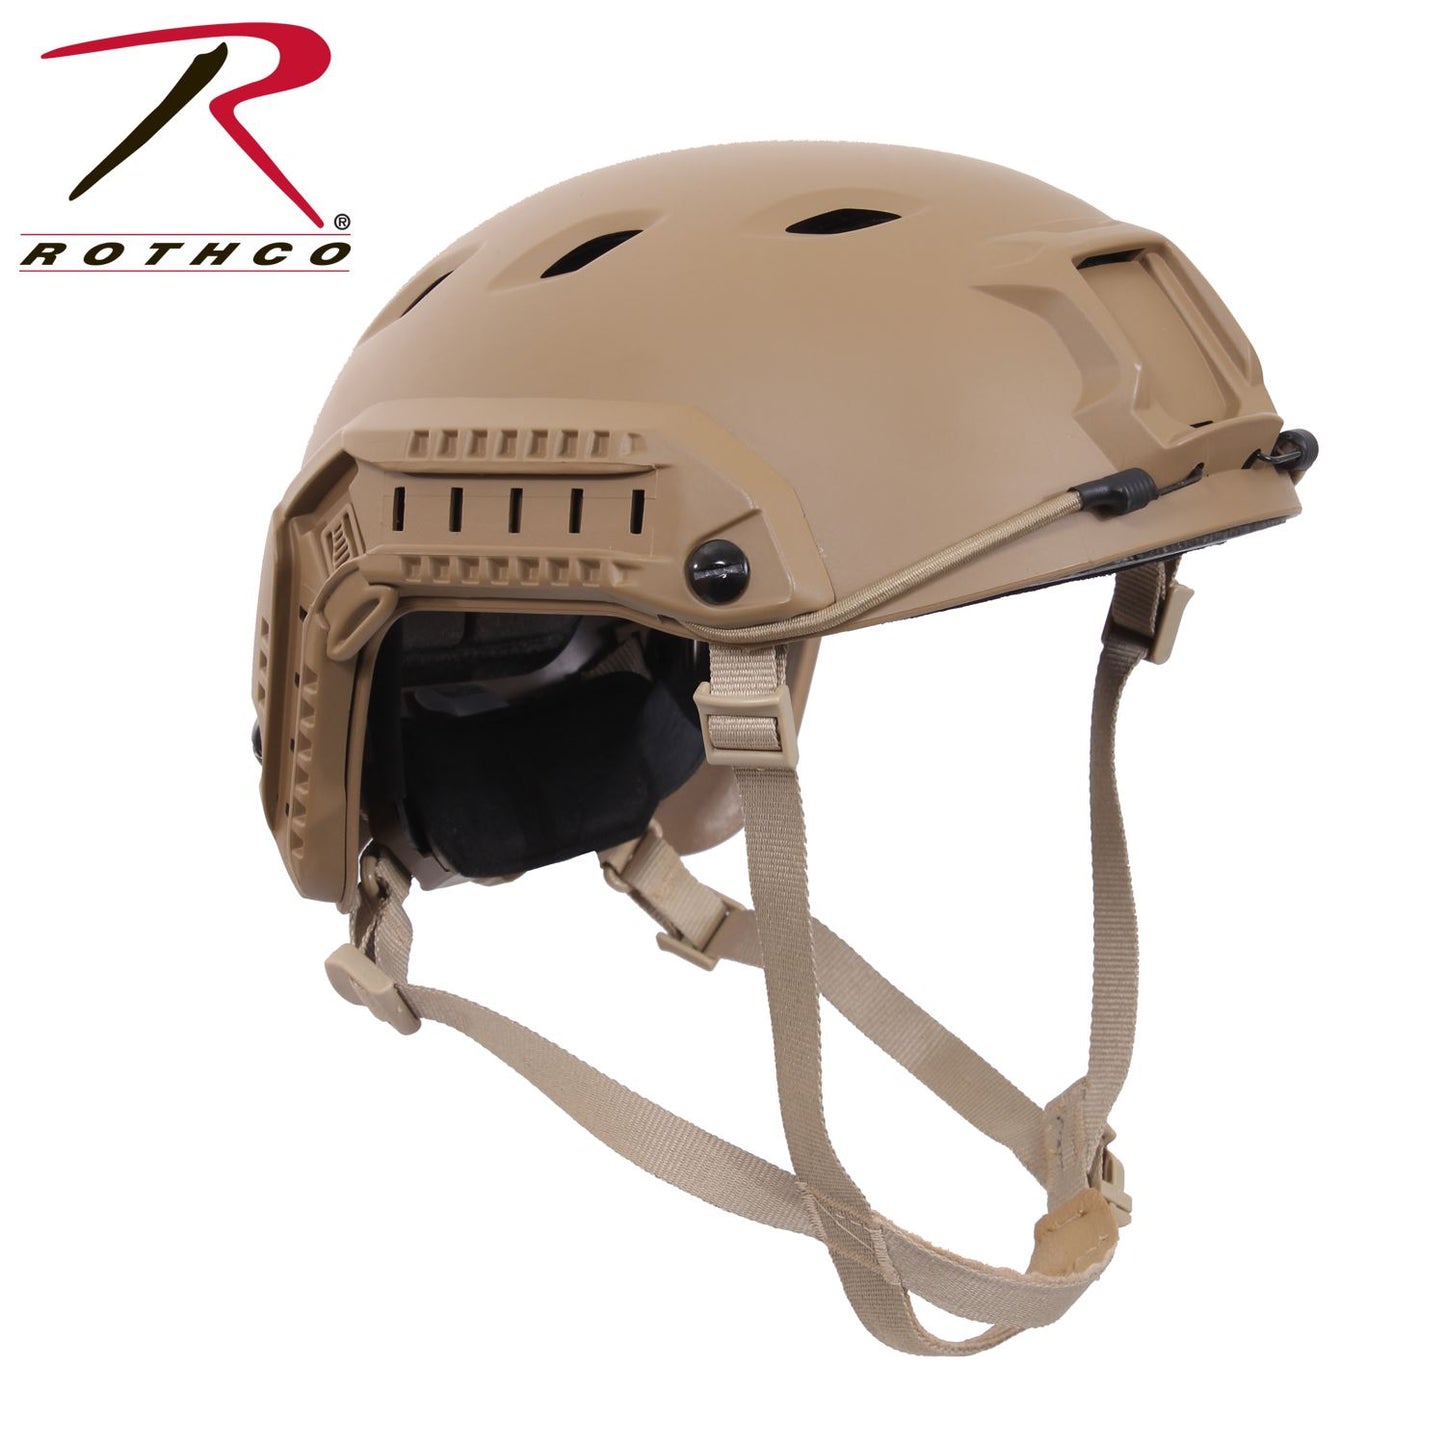 Rothco Advanced Tactical Adjustable Airsoft Helmet - Coyote Brown